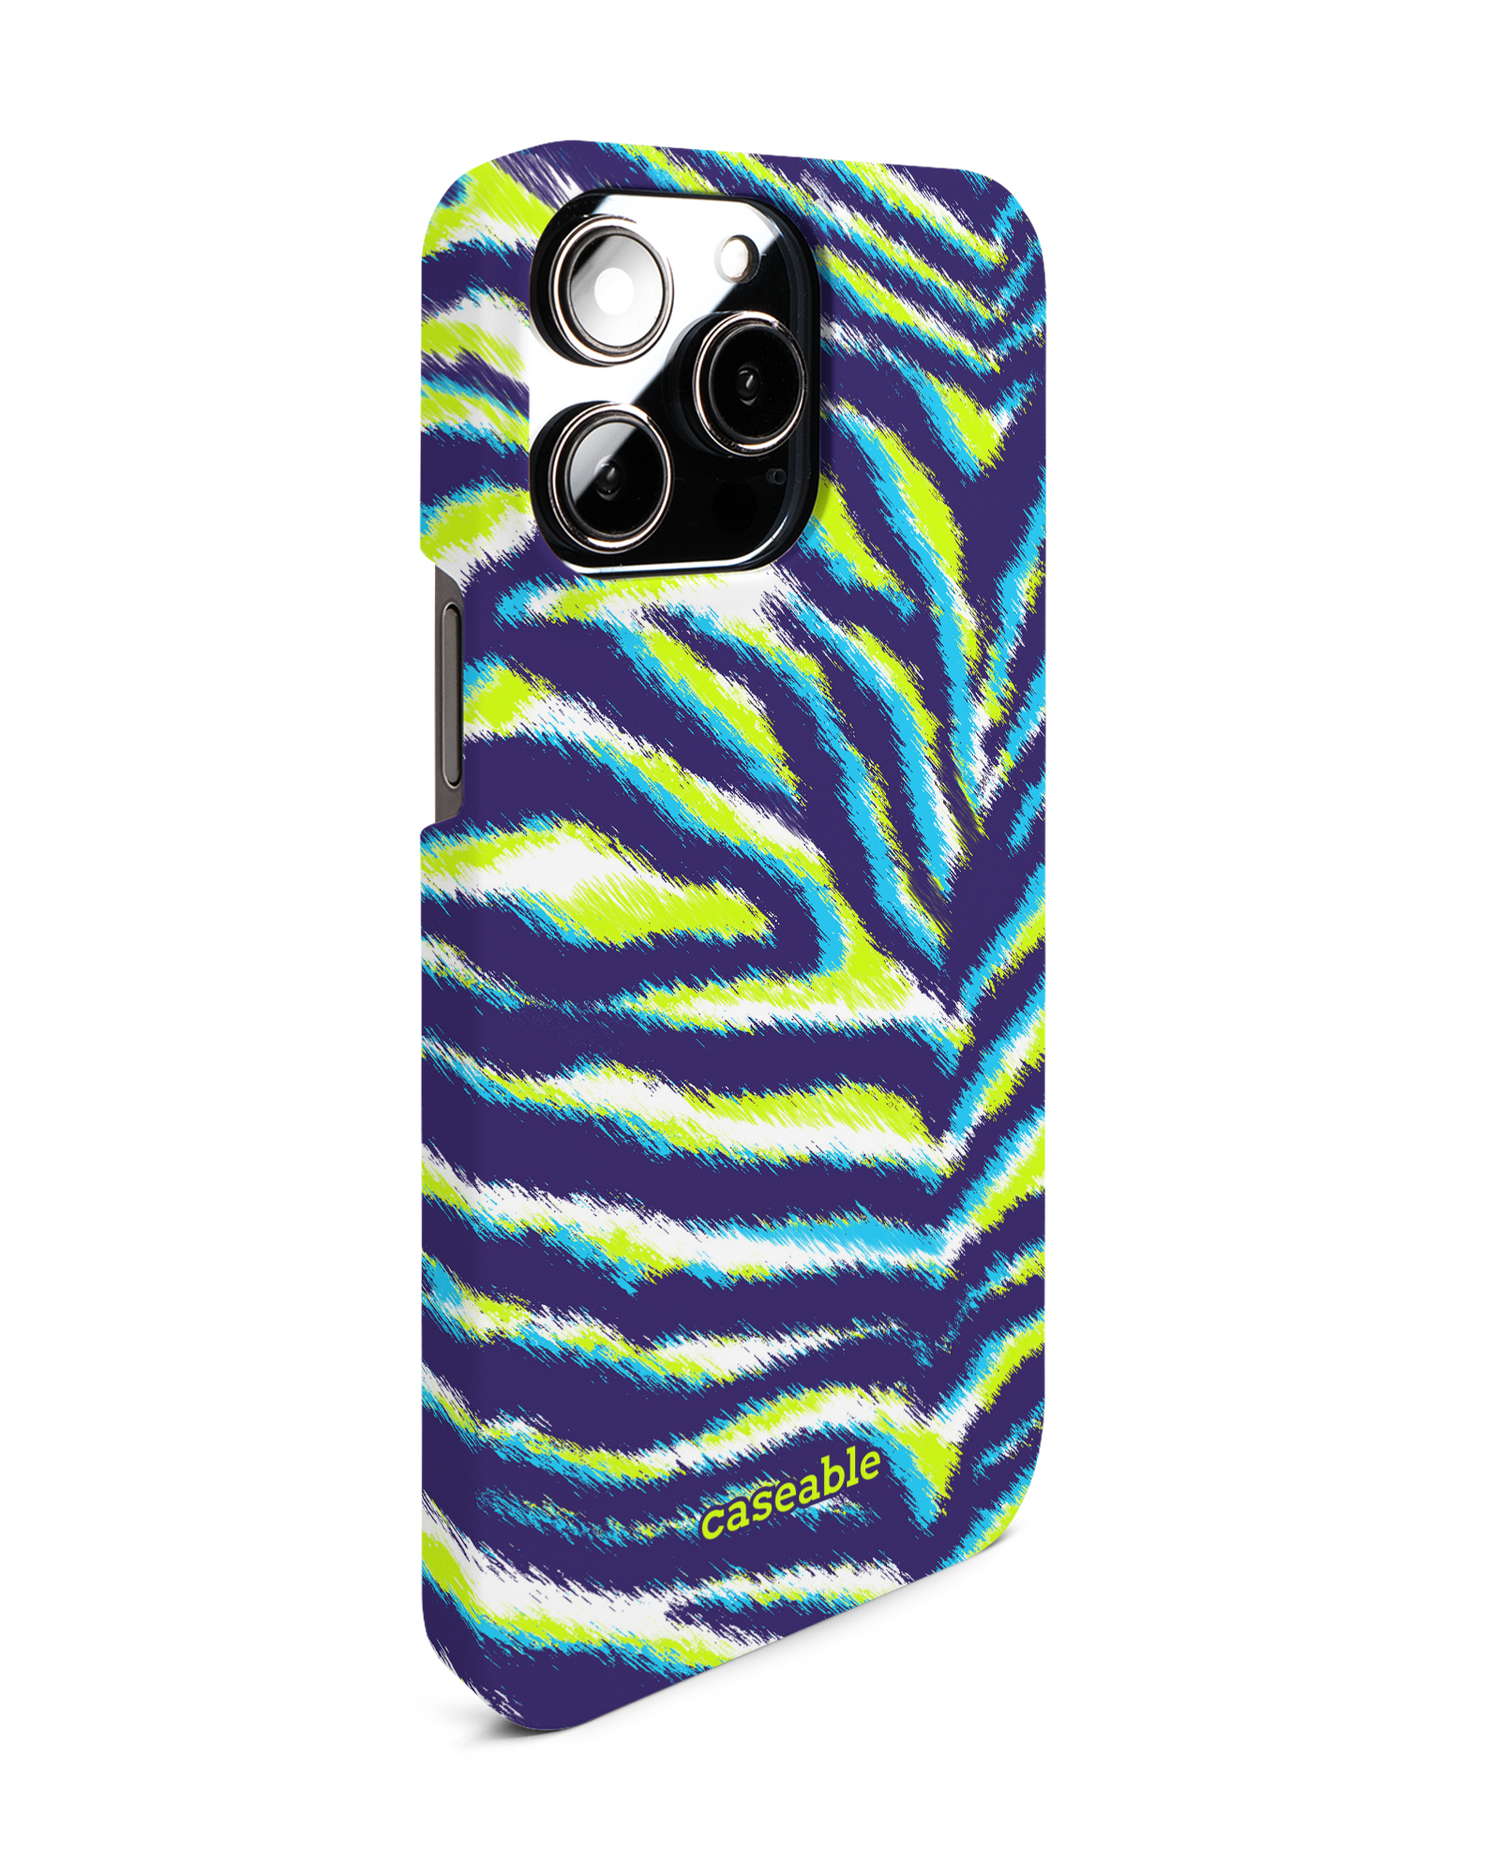 Neon Zebra Hard Shell Phone Case for Apple iPhone 14 Pro Max: View from the left side